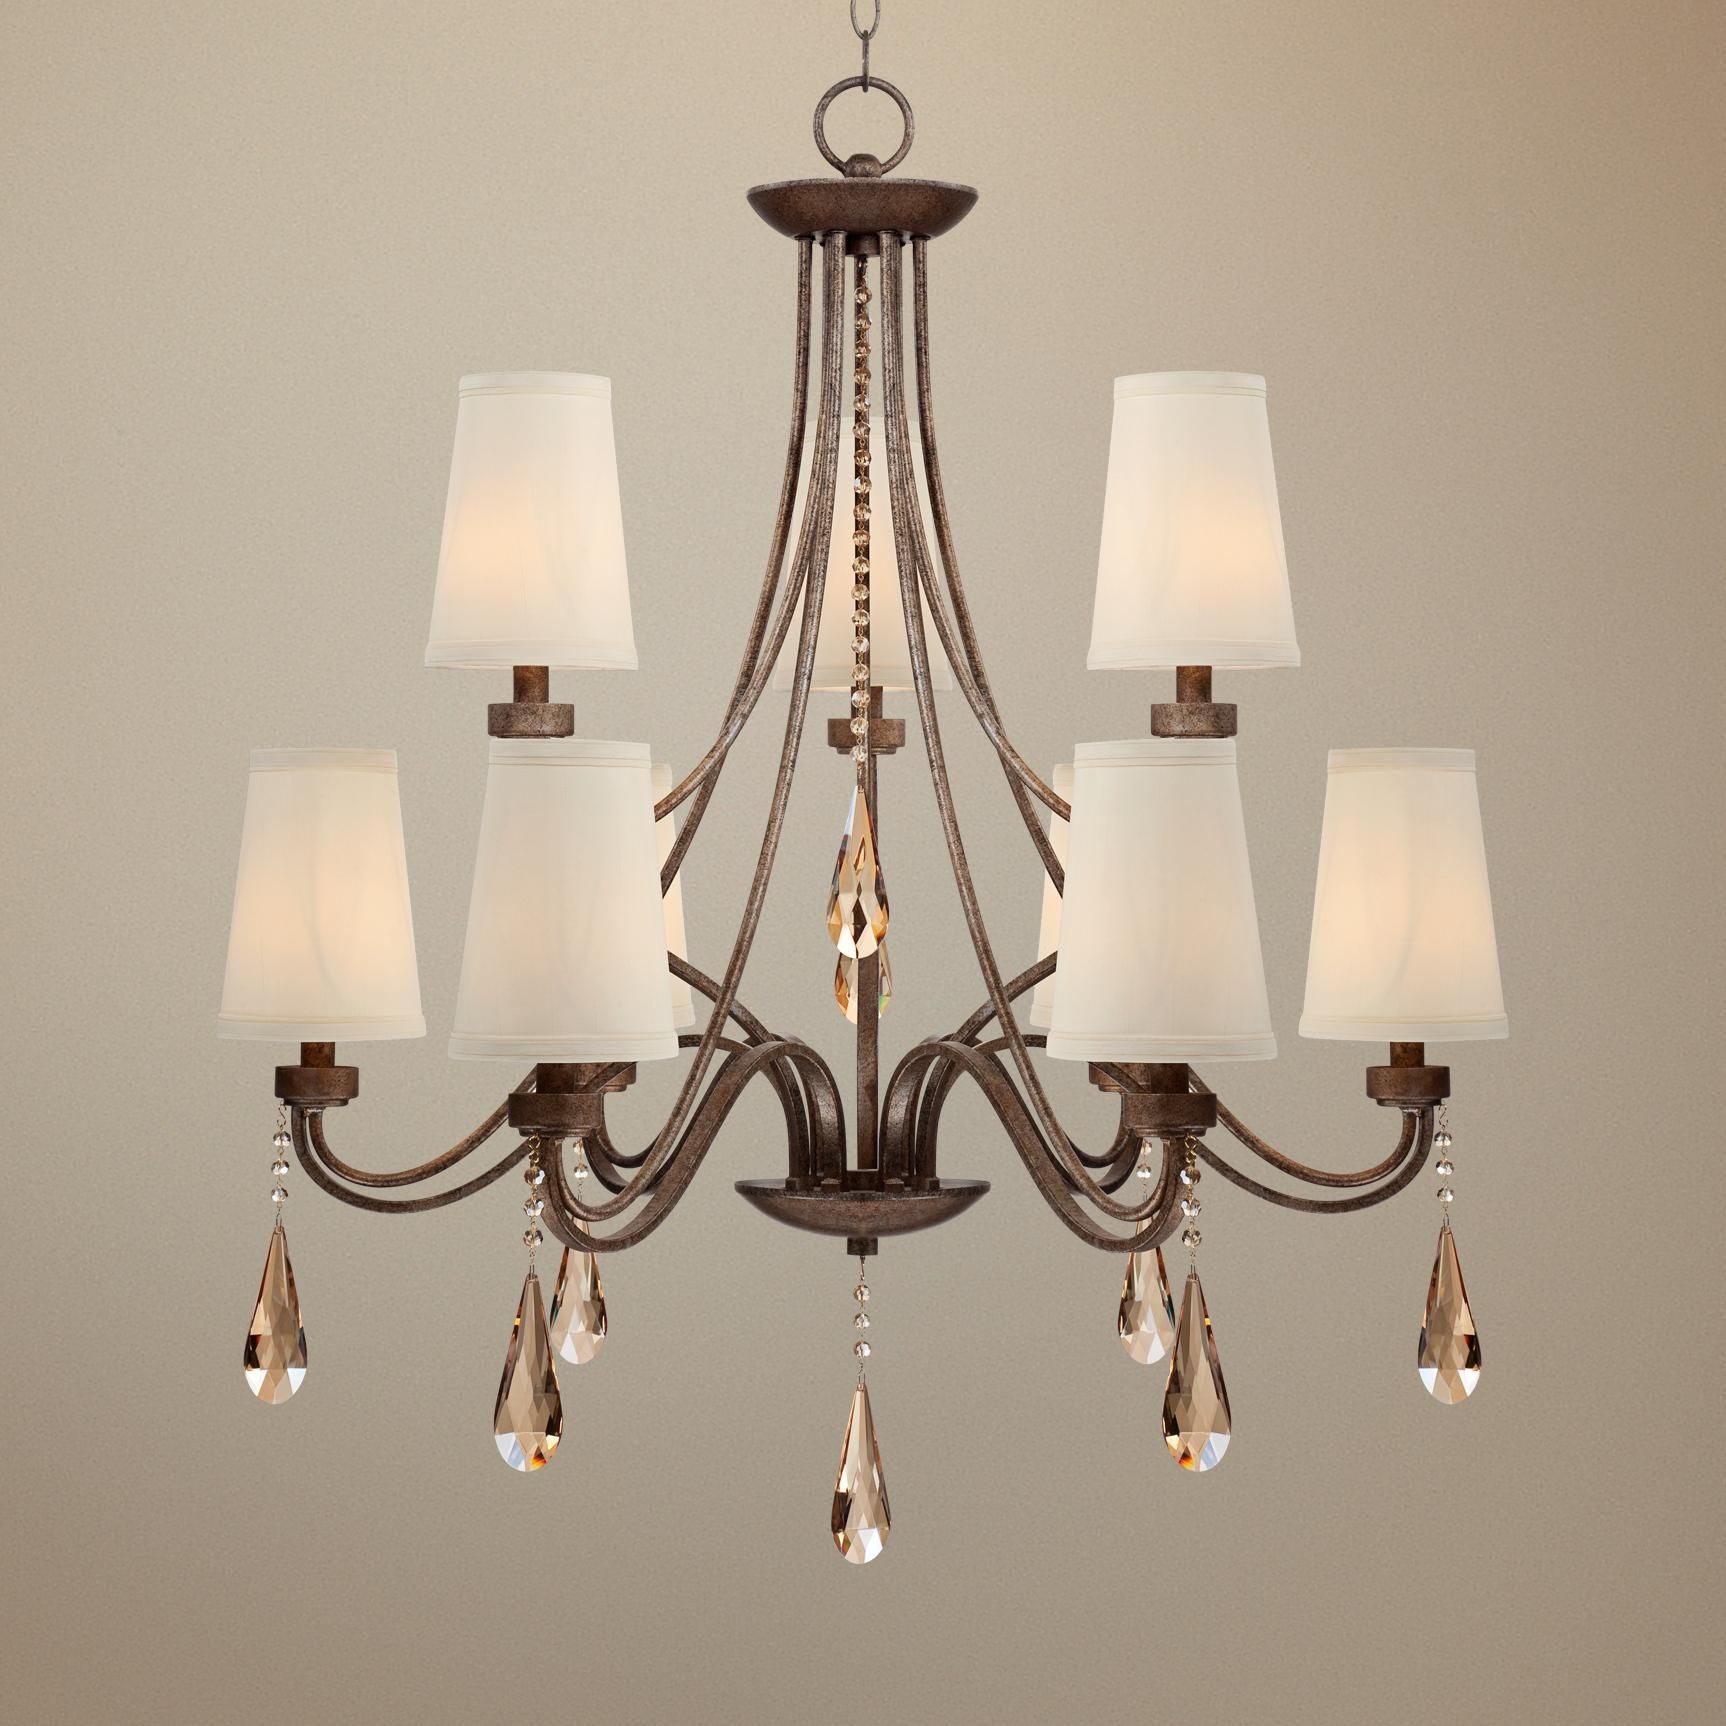 Jayce 32" Wide Champagne Crystal Chandelierkathy Throughout Champagne Glass Chandeliers (View 1 of 15)